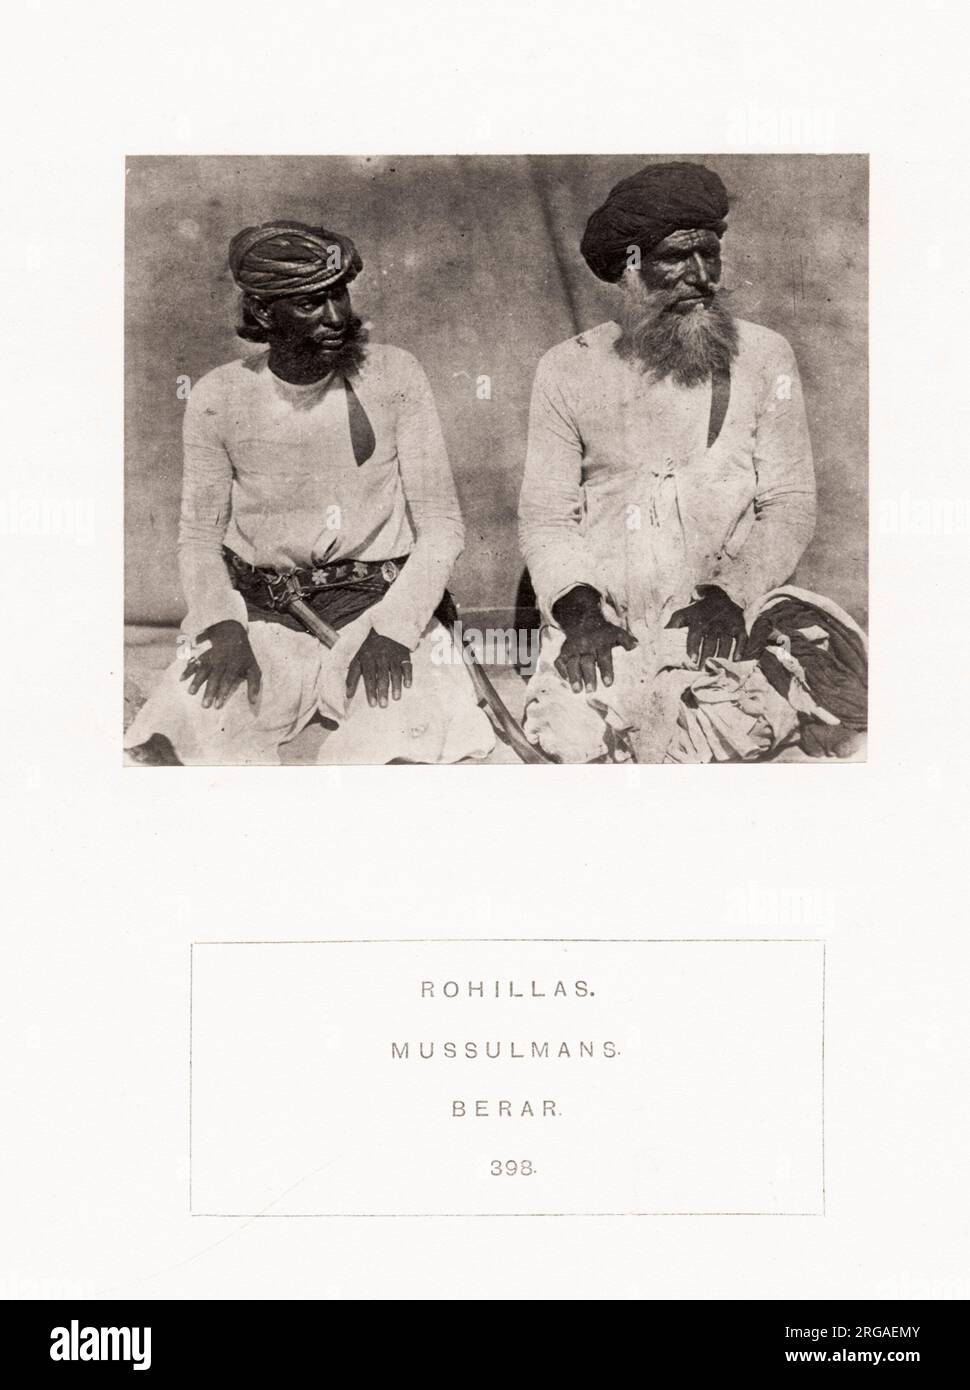 Vintage 19th century photograph: The People of India: A Series of Photographic Illustrations, with Descriptive Letterpress, of the Races and Tribes of Hindustan - published in the 1860s under order of the Viceroy, Lord Canning - Rohillas Mussulmans, Muslims, Berar. Stock Photo